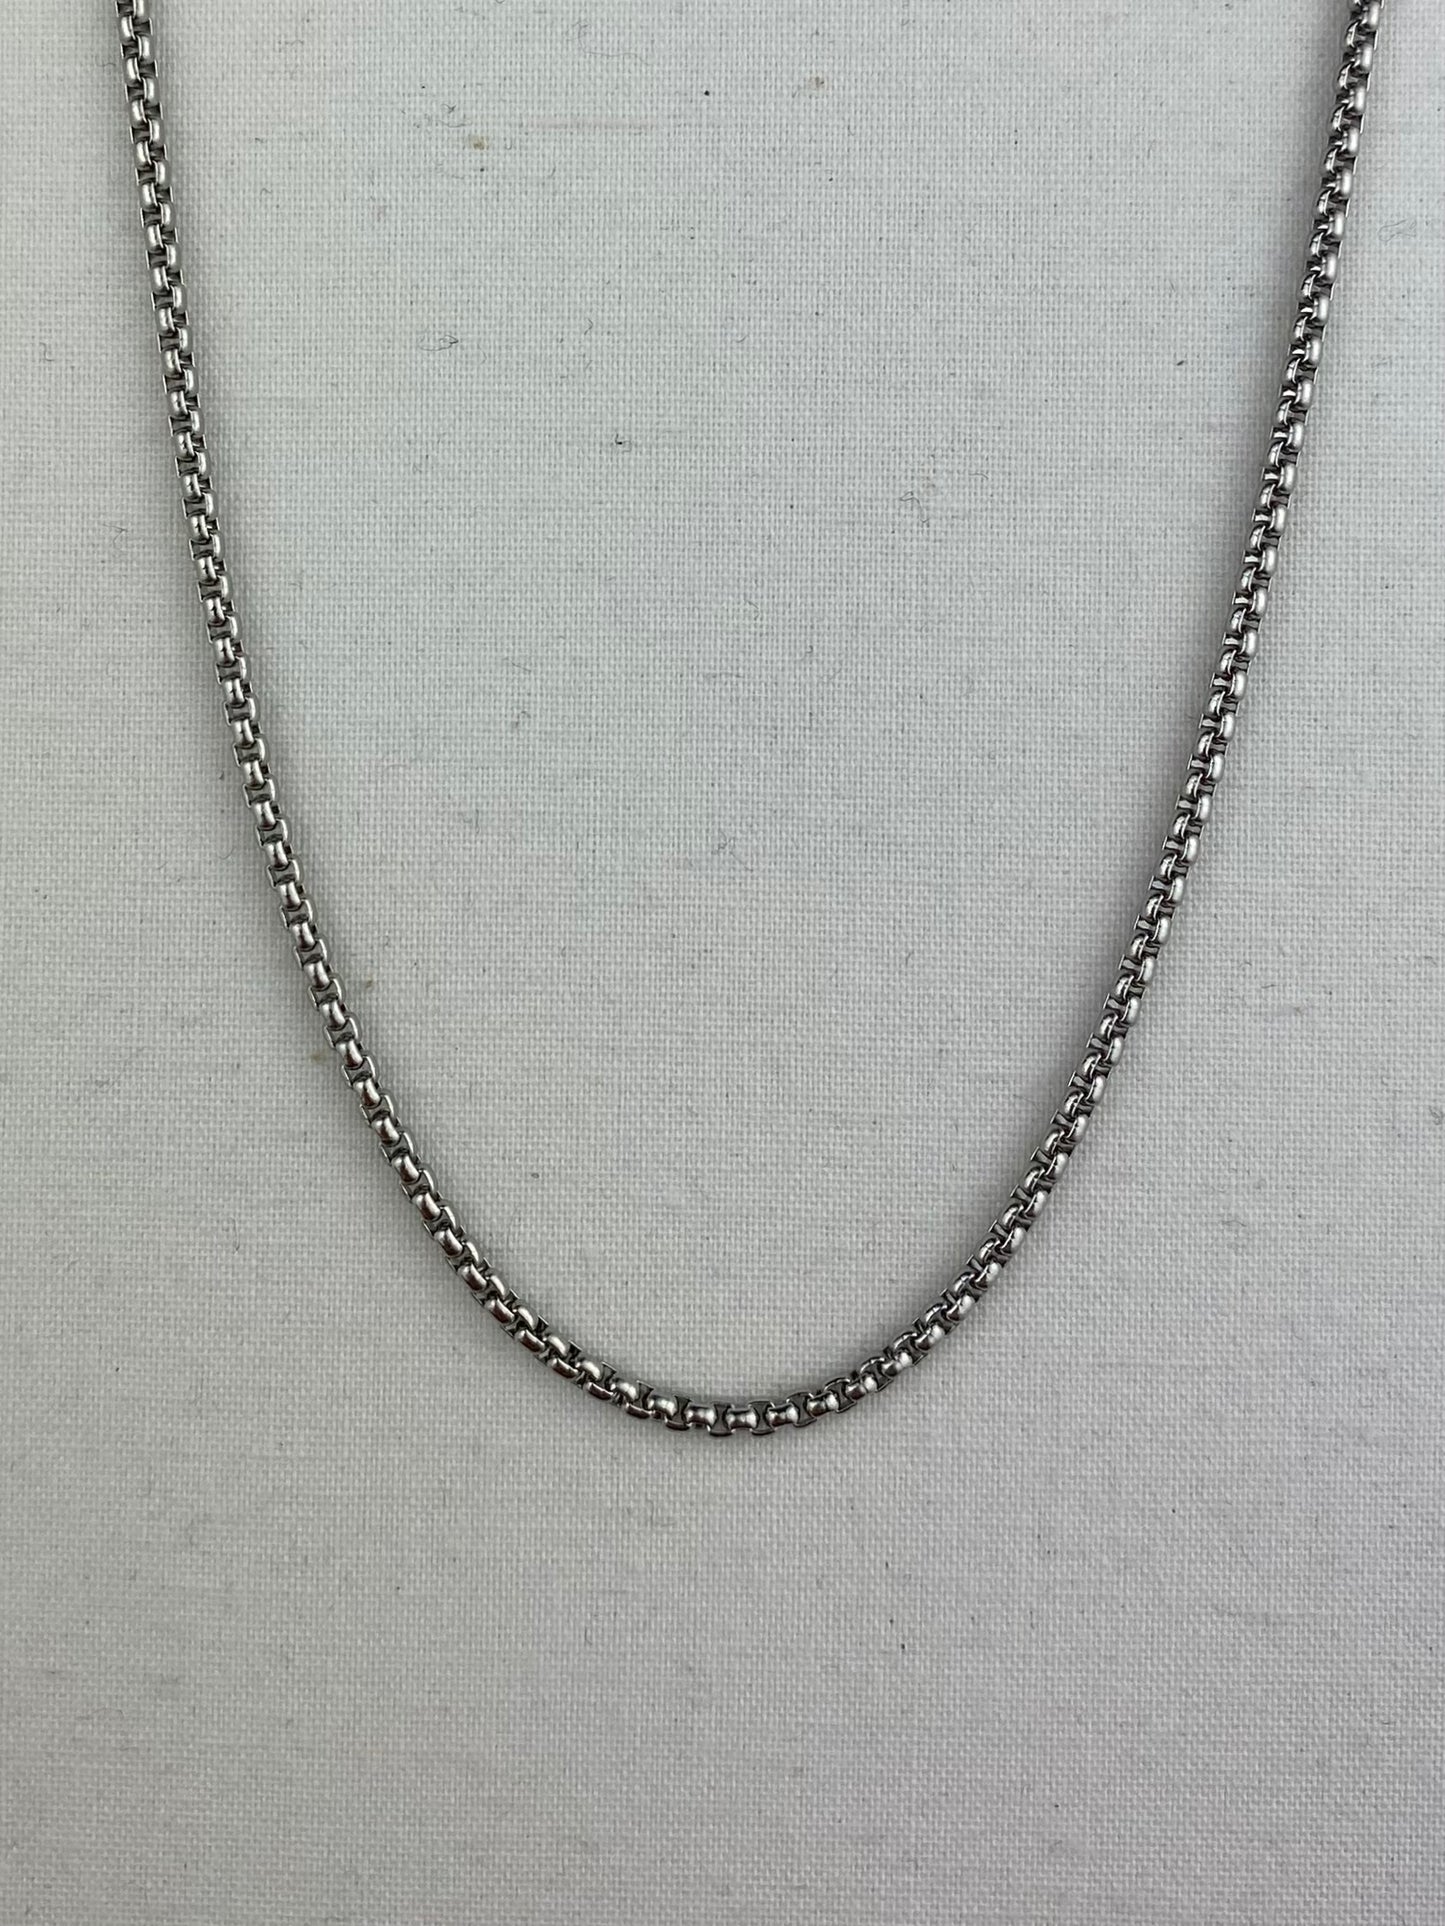 Slim Box Necklace - Stainless Steel